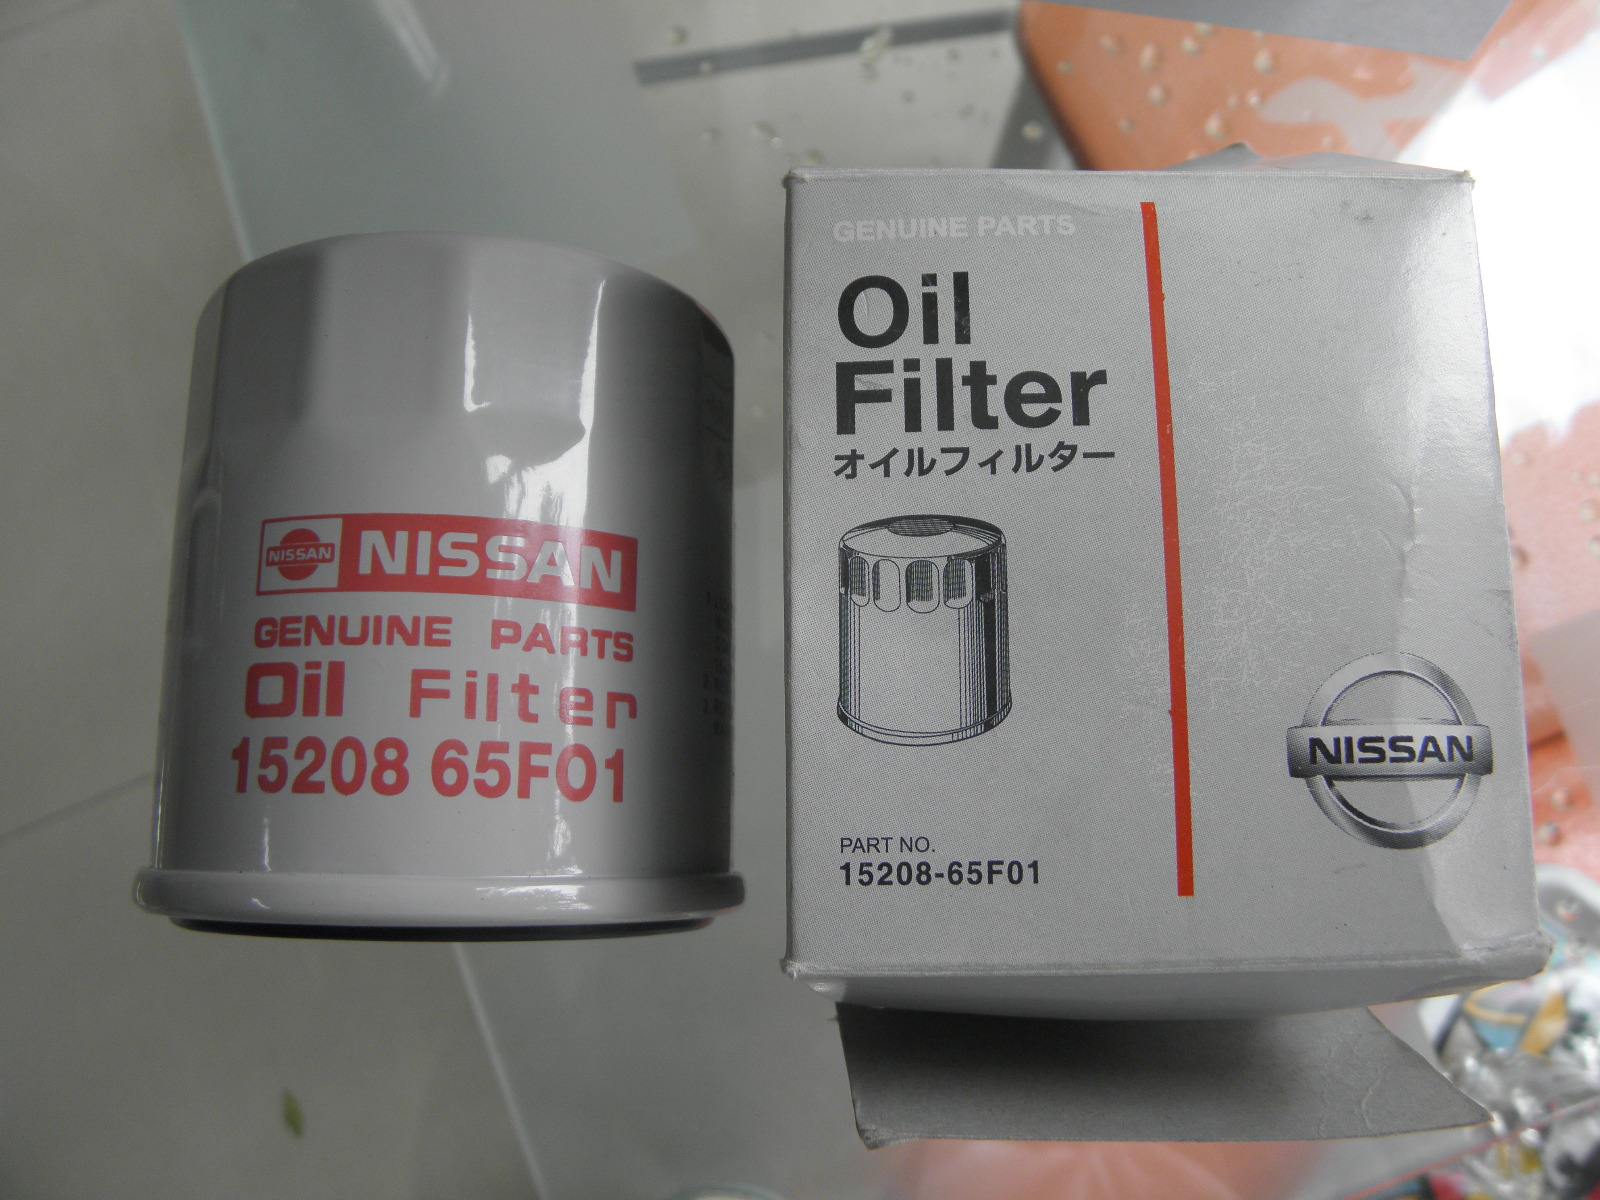 Original Nissan S14 Filter 15208-65F01 at lowest price $1.5 per piece in hot sale!!!!